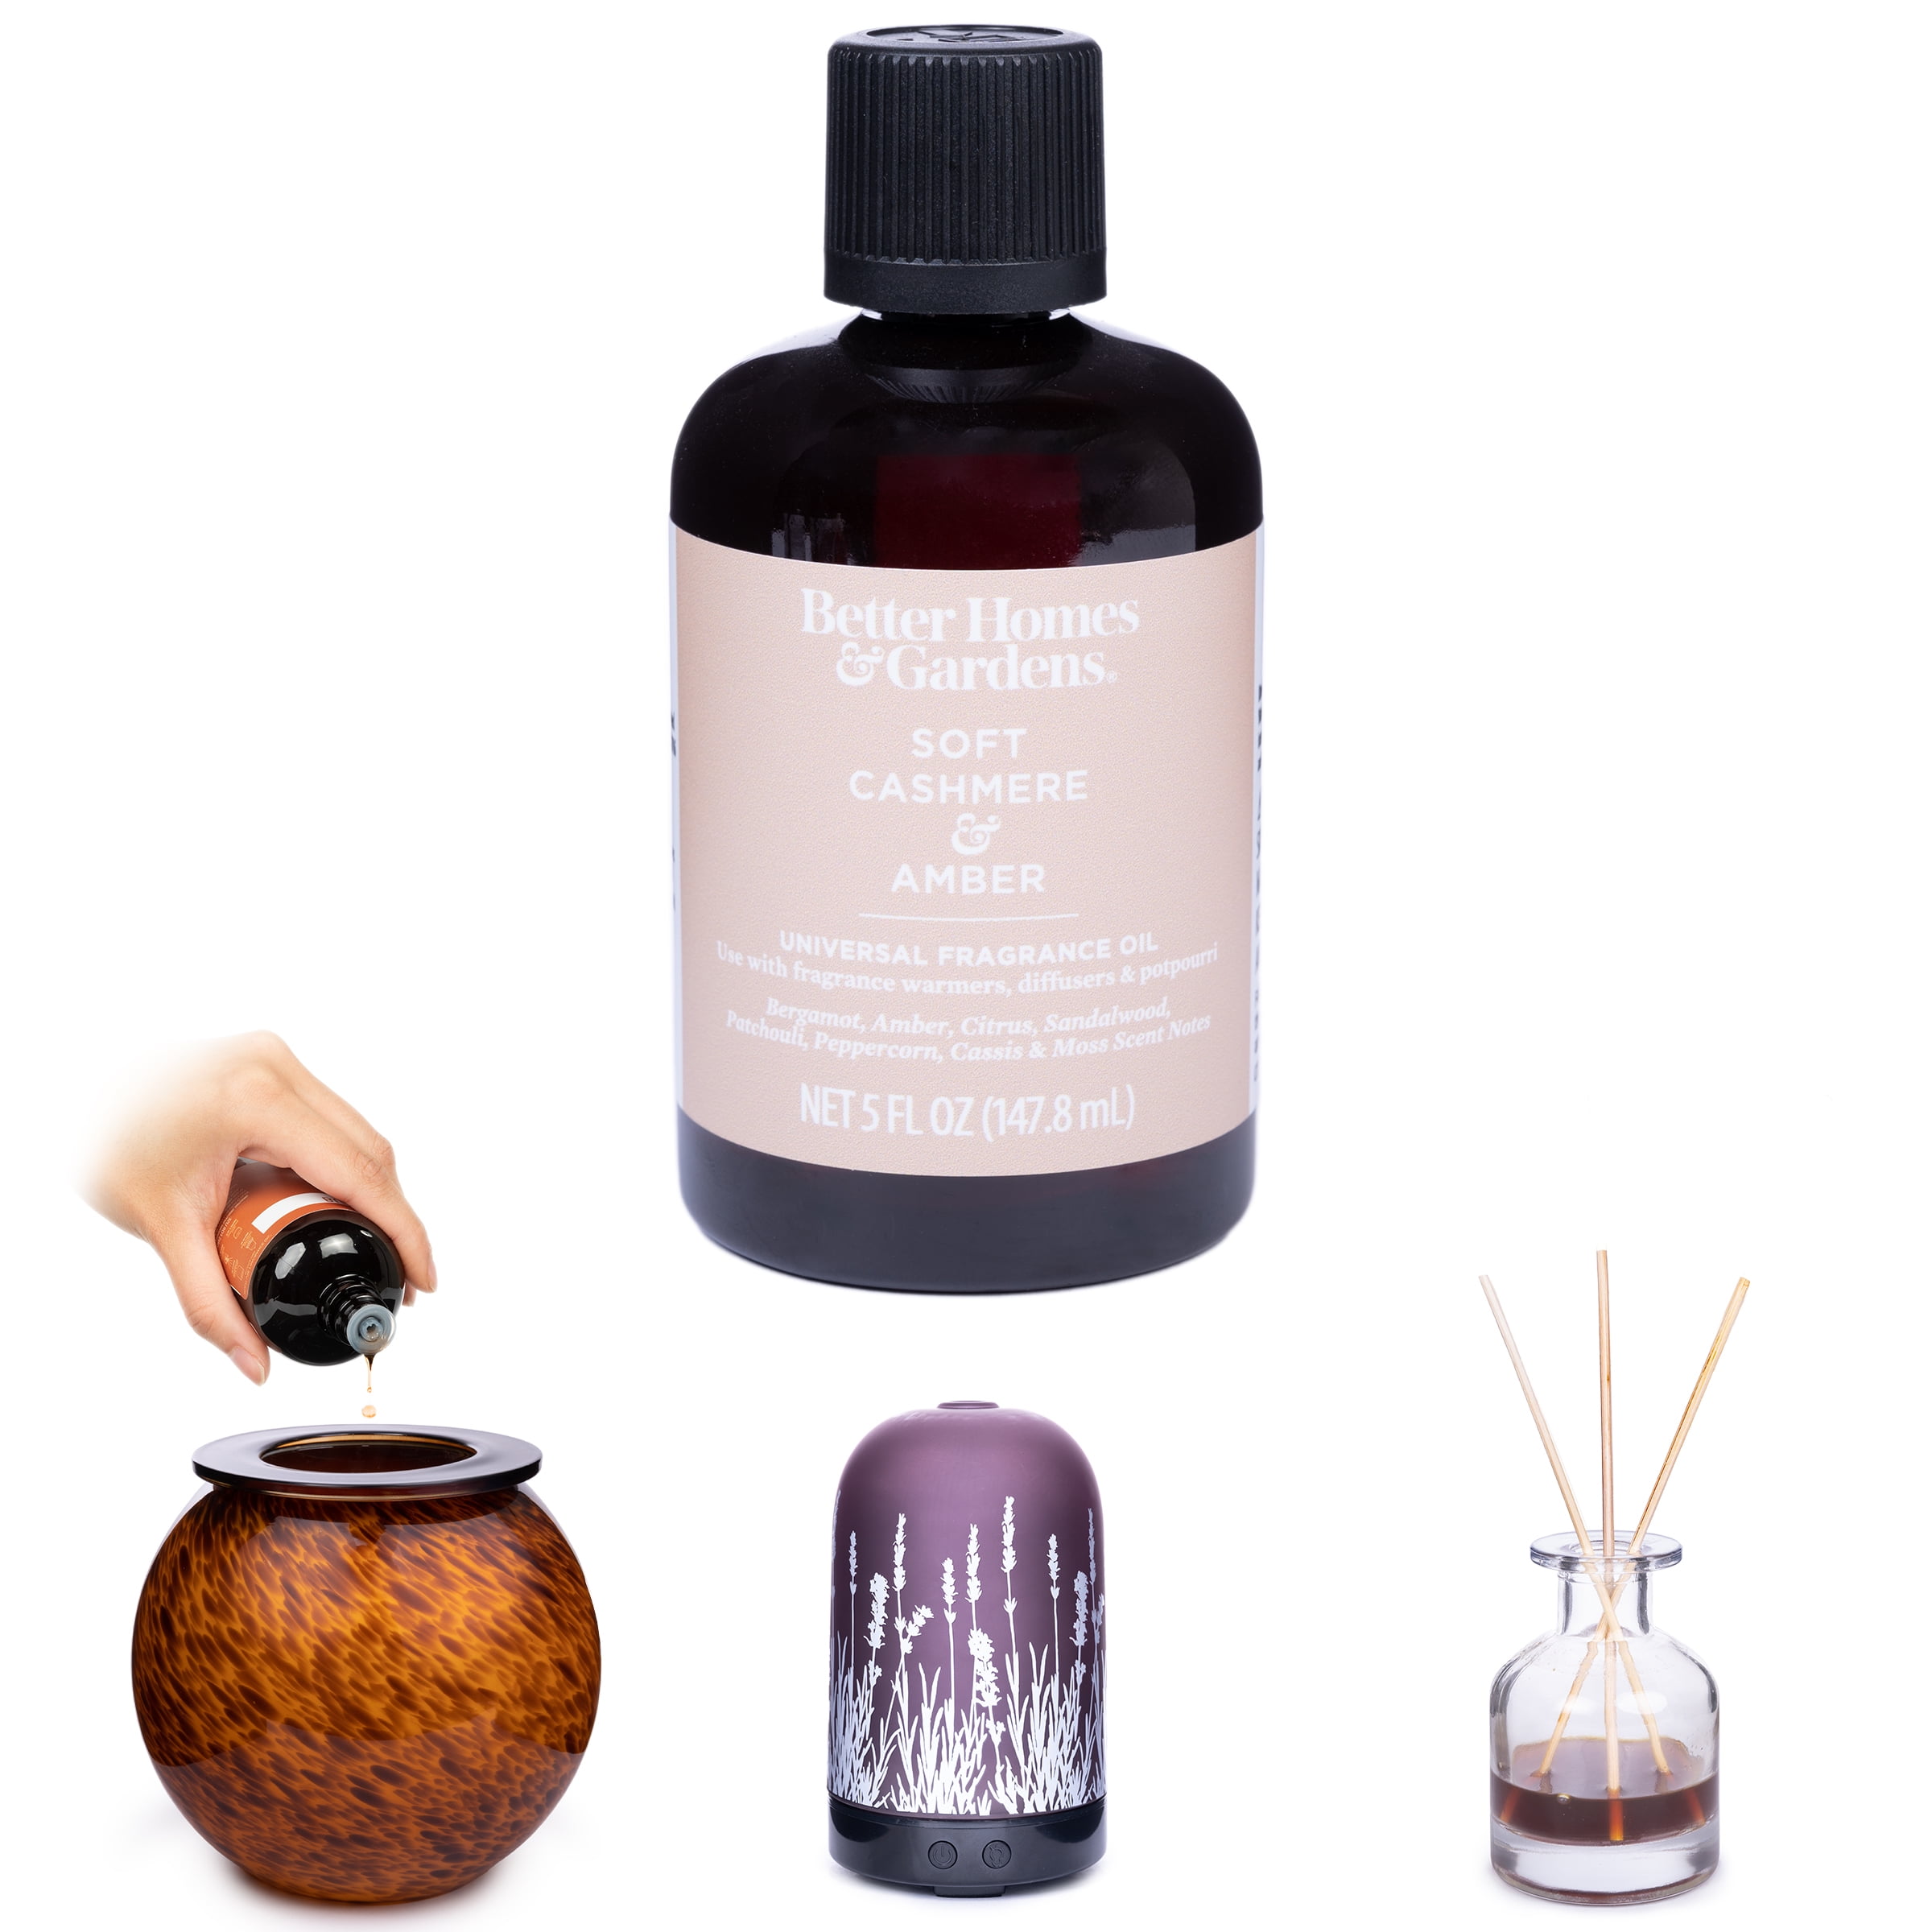 Nature's Oil Our Version of Bath & Body Works Cashmere Glow Fragrance Oil | 16 | Michaels